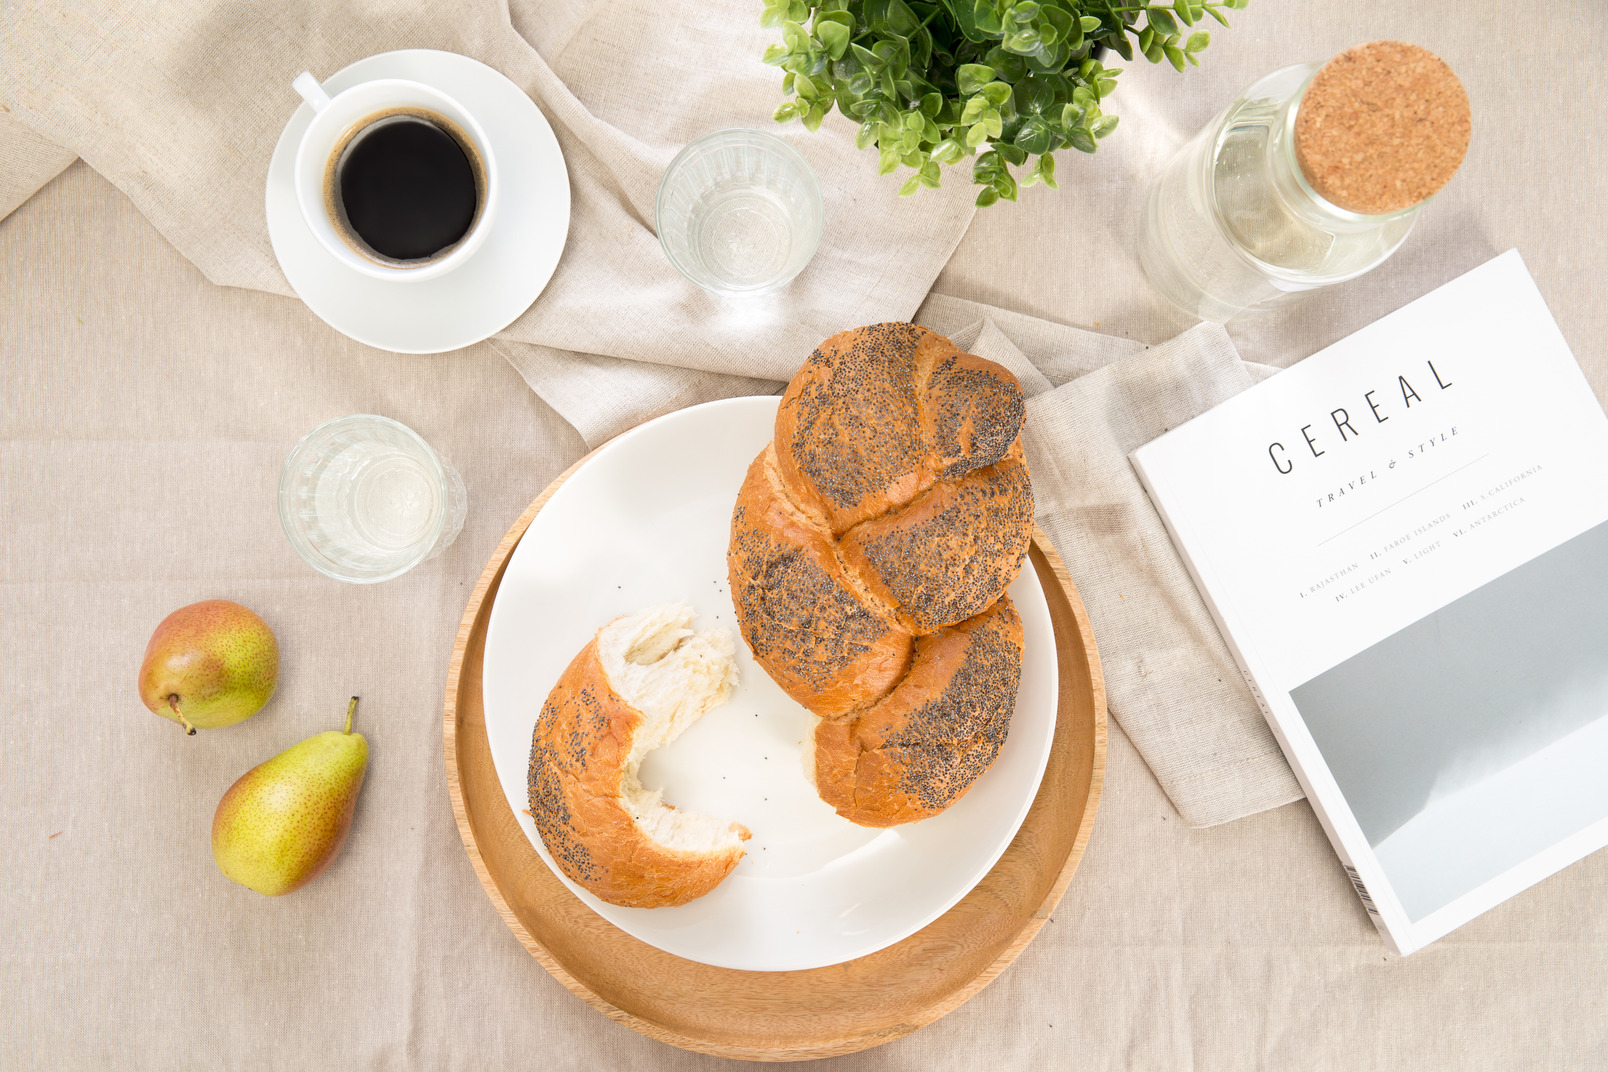 Bread with poppy seeds on the plate, cup of coffee, magazine and water on the tablecloth